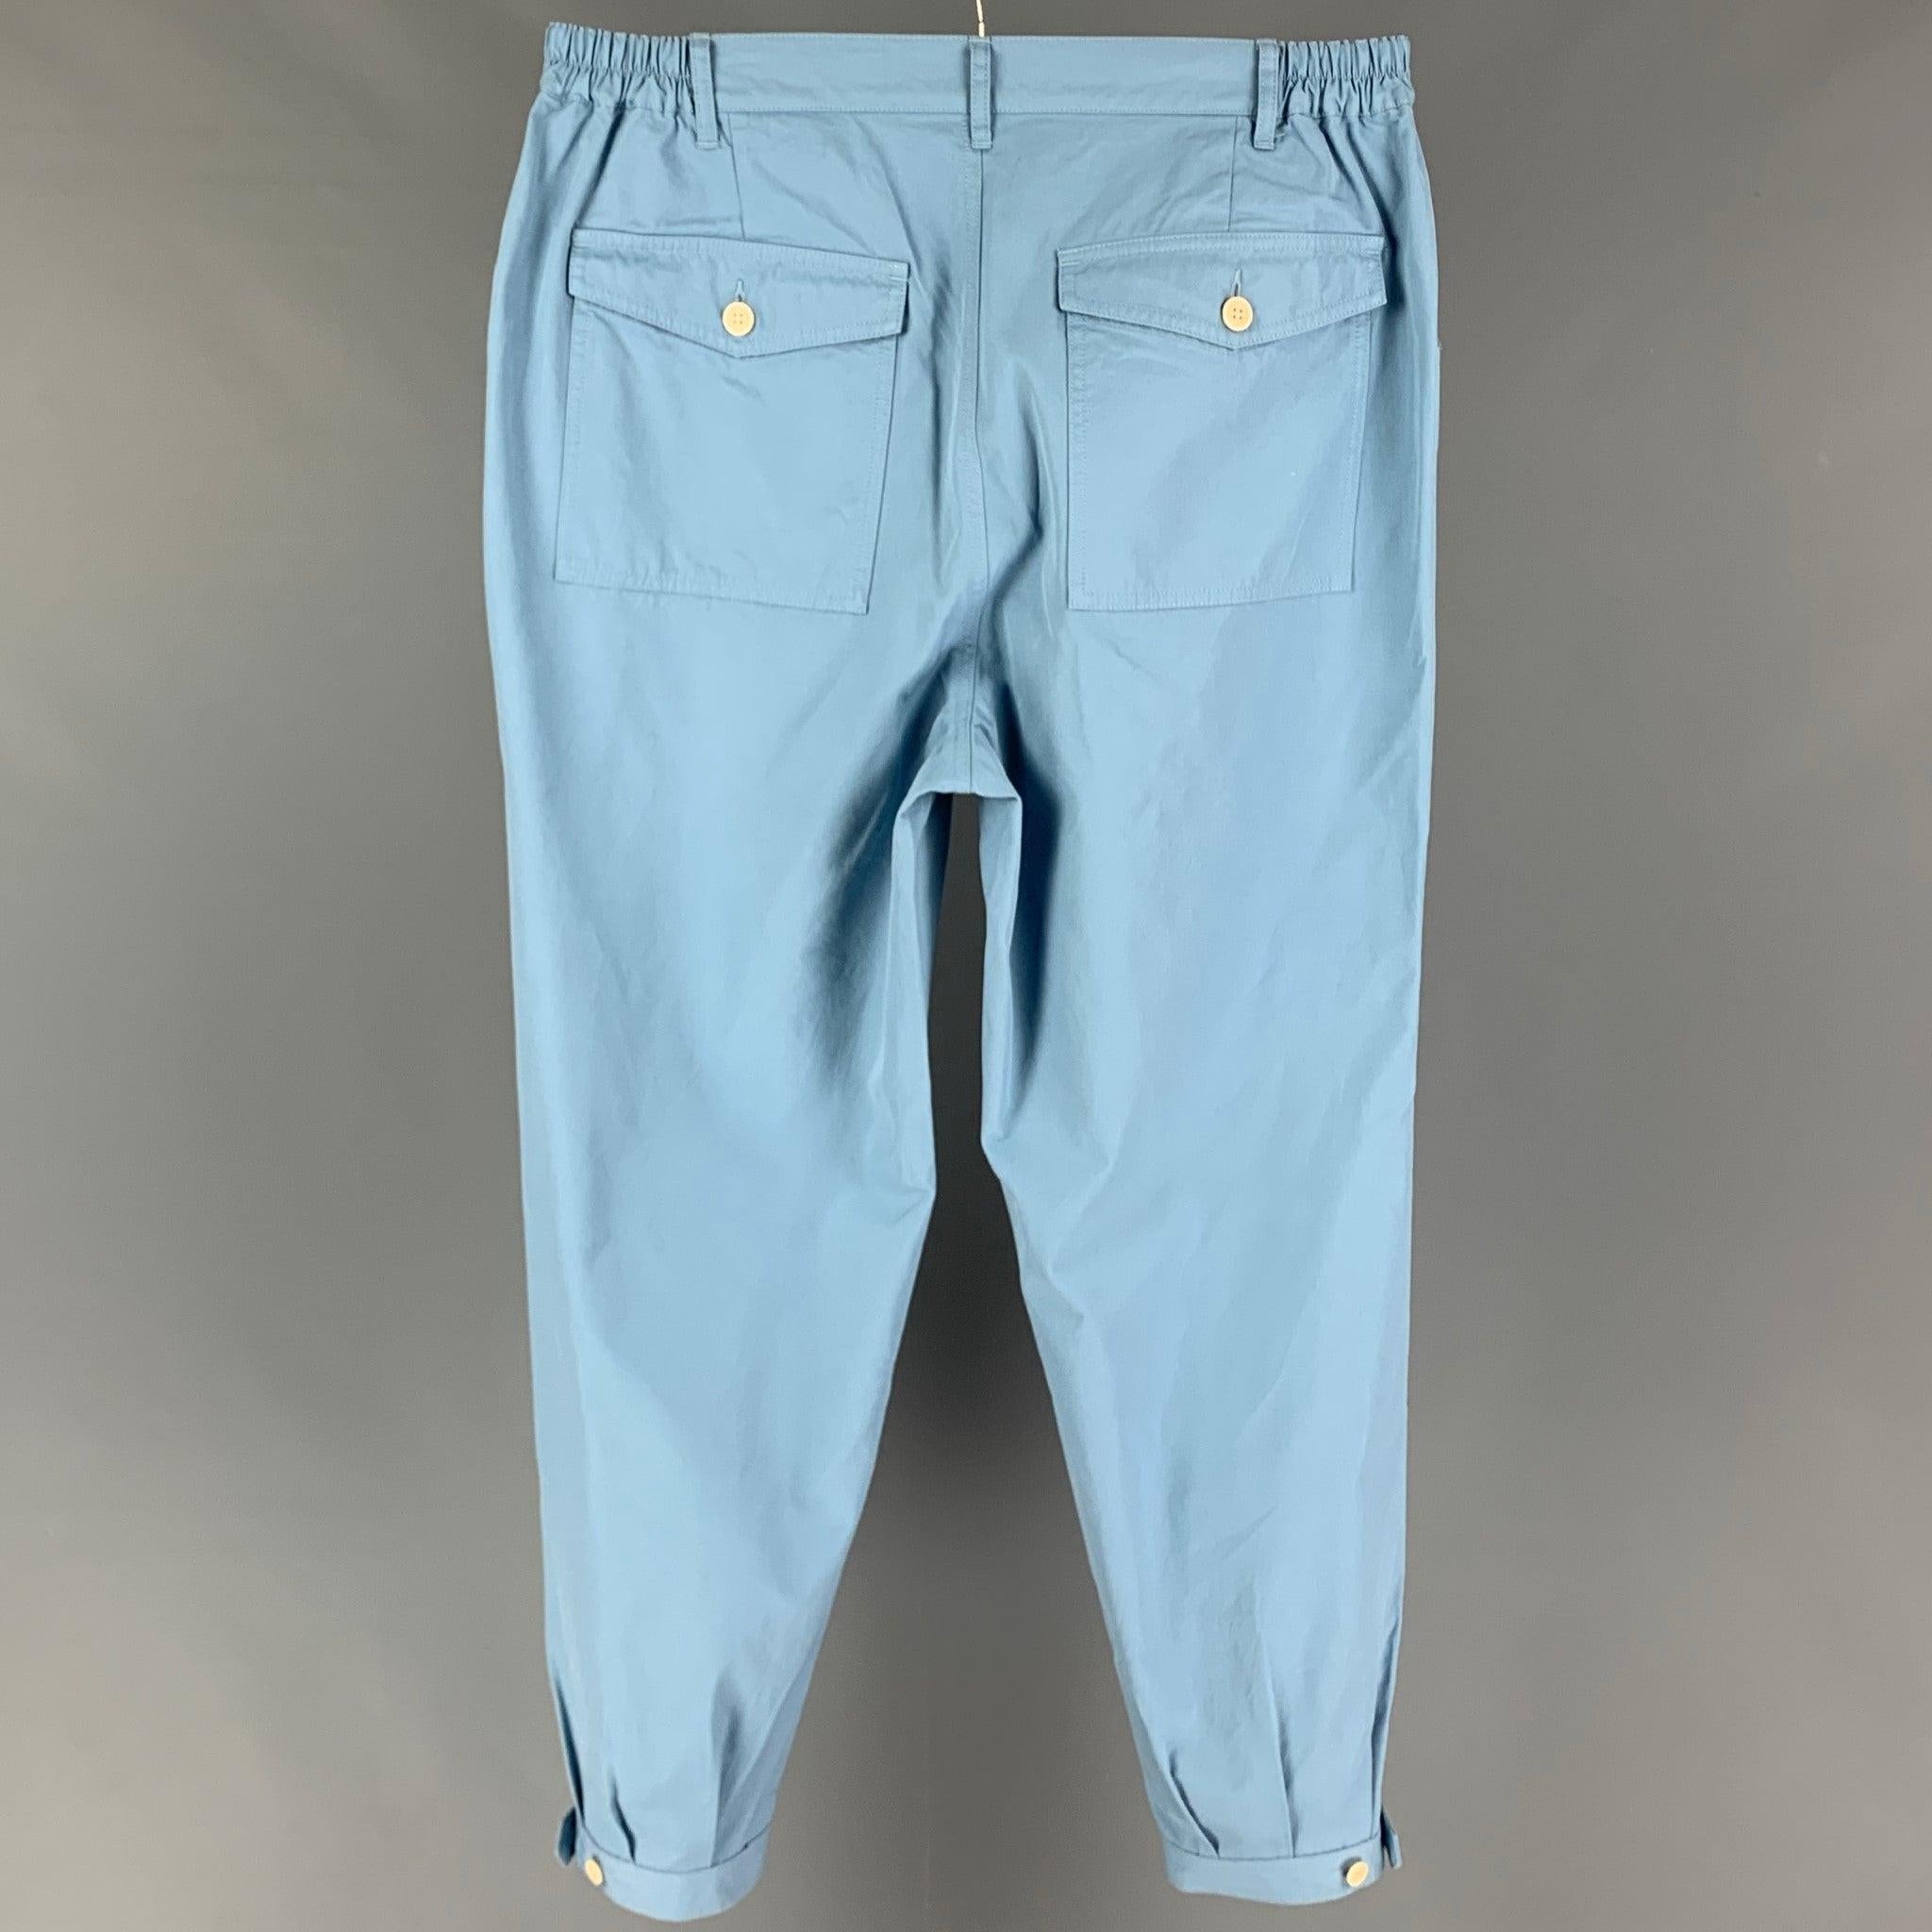 VISVIM 'Carroll' pants comes in a light blue cotton featuring a elastic waistband, buttoned cuffs, adjustable buttoned tab, and a zip fly closure. Made in Japan.
New With Tags.
 

Marked:   JP 3 

Measurements: 
  Waist: 34 inches  Rise: 14 inches 